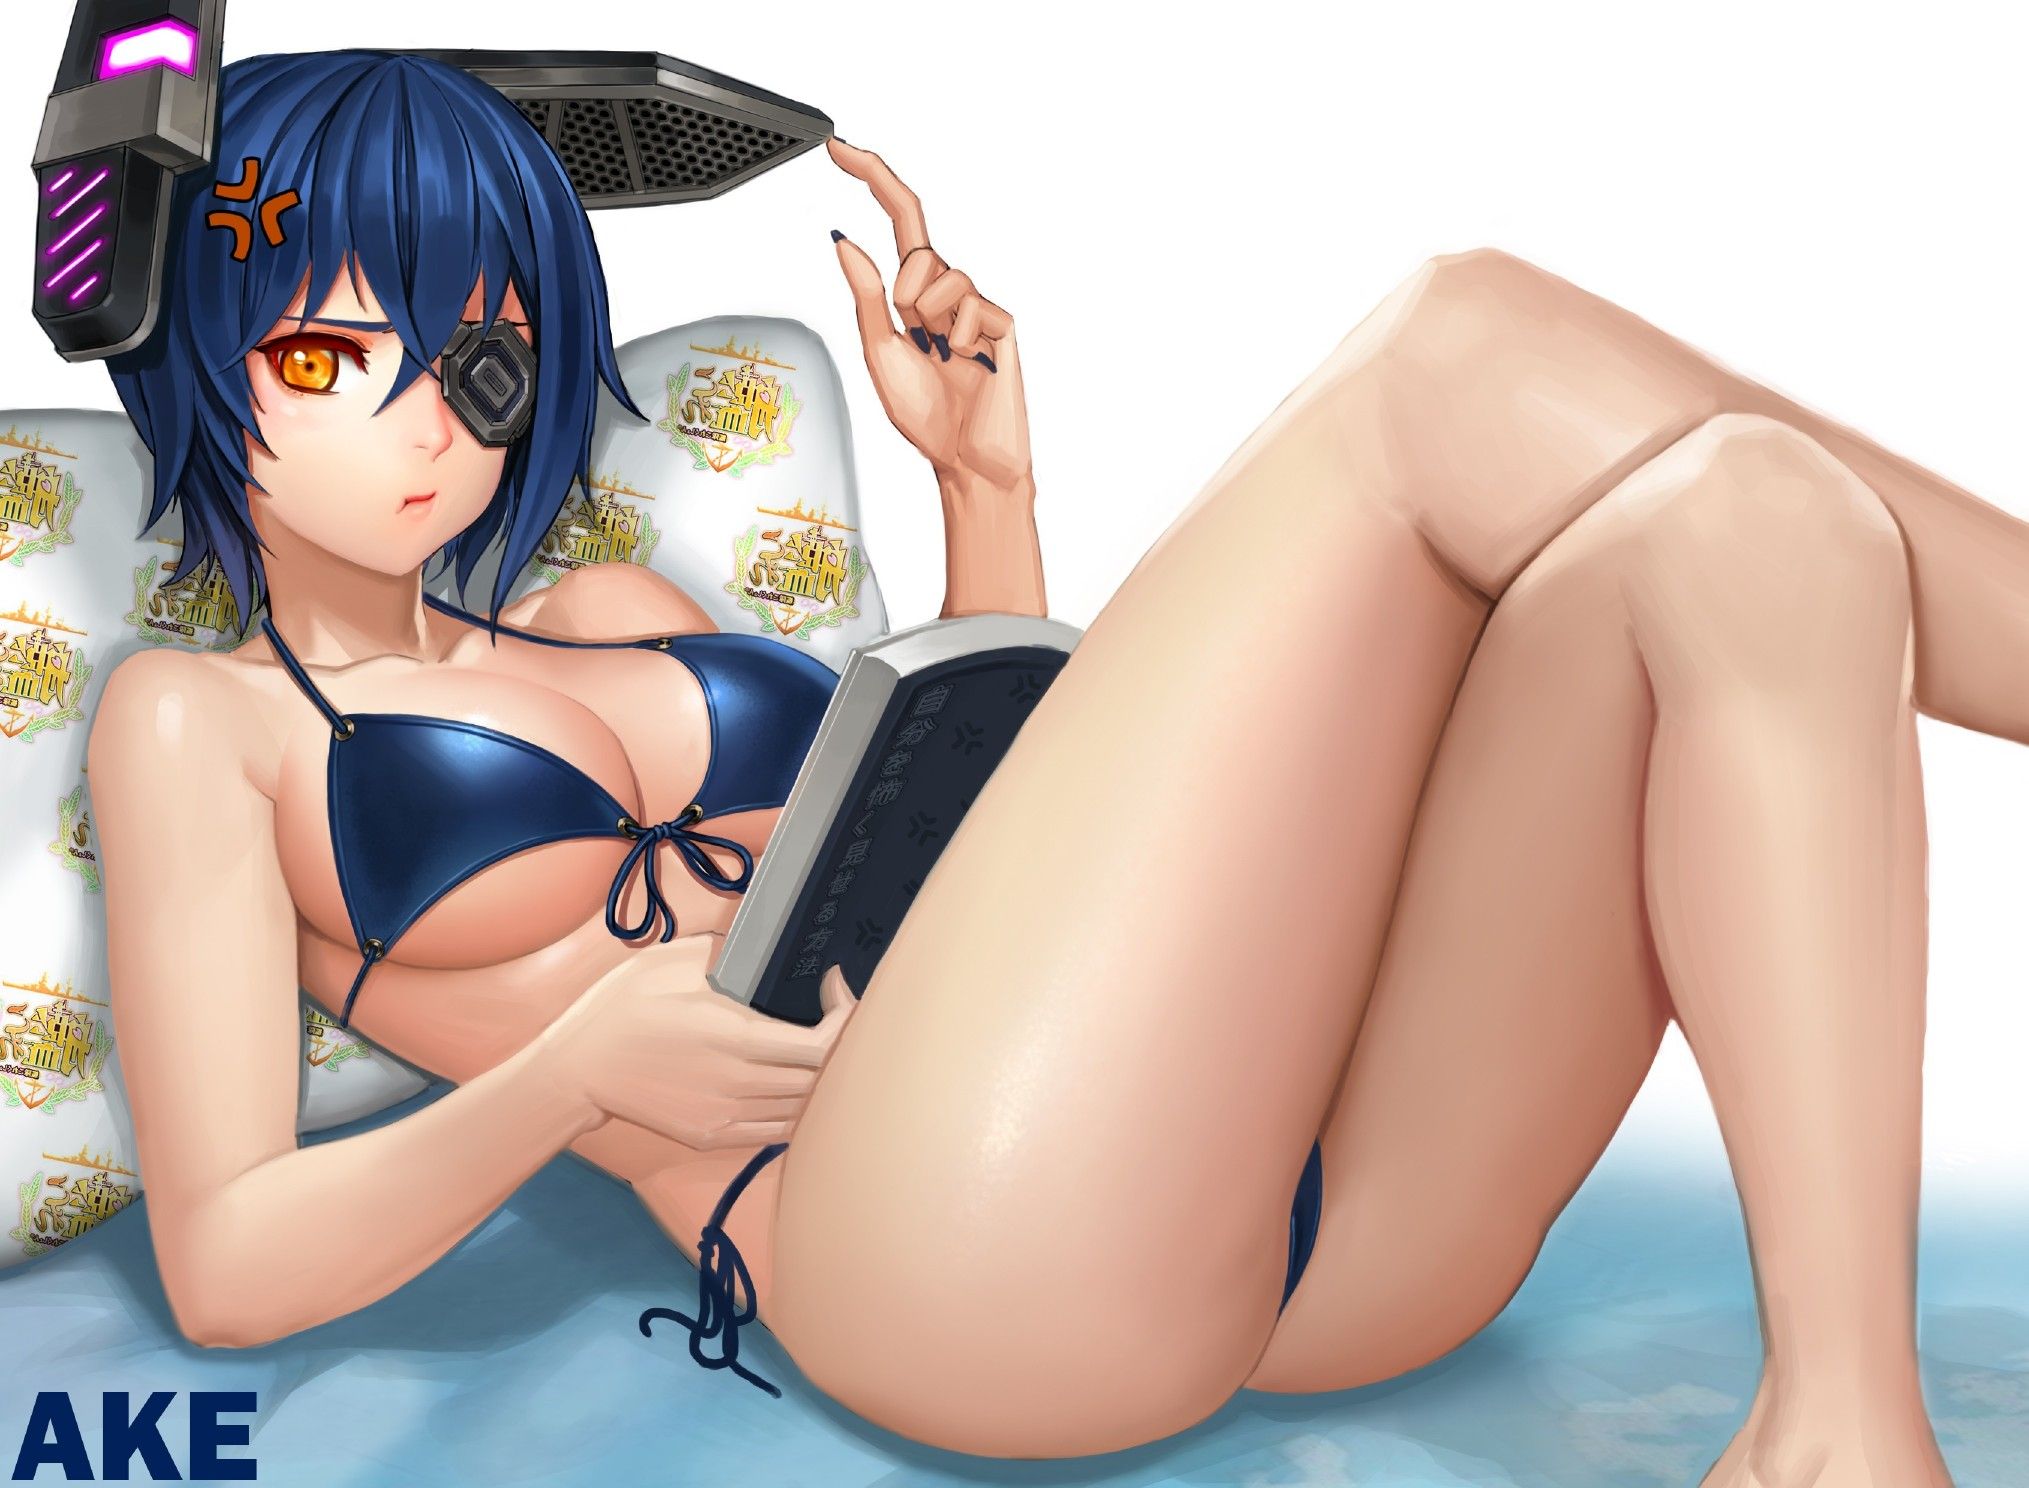 【Fleet Kokushōn】 Cute erotica image summary that comes out with Tenryu no Echi 1